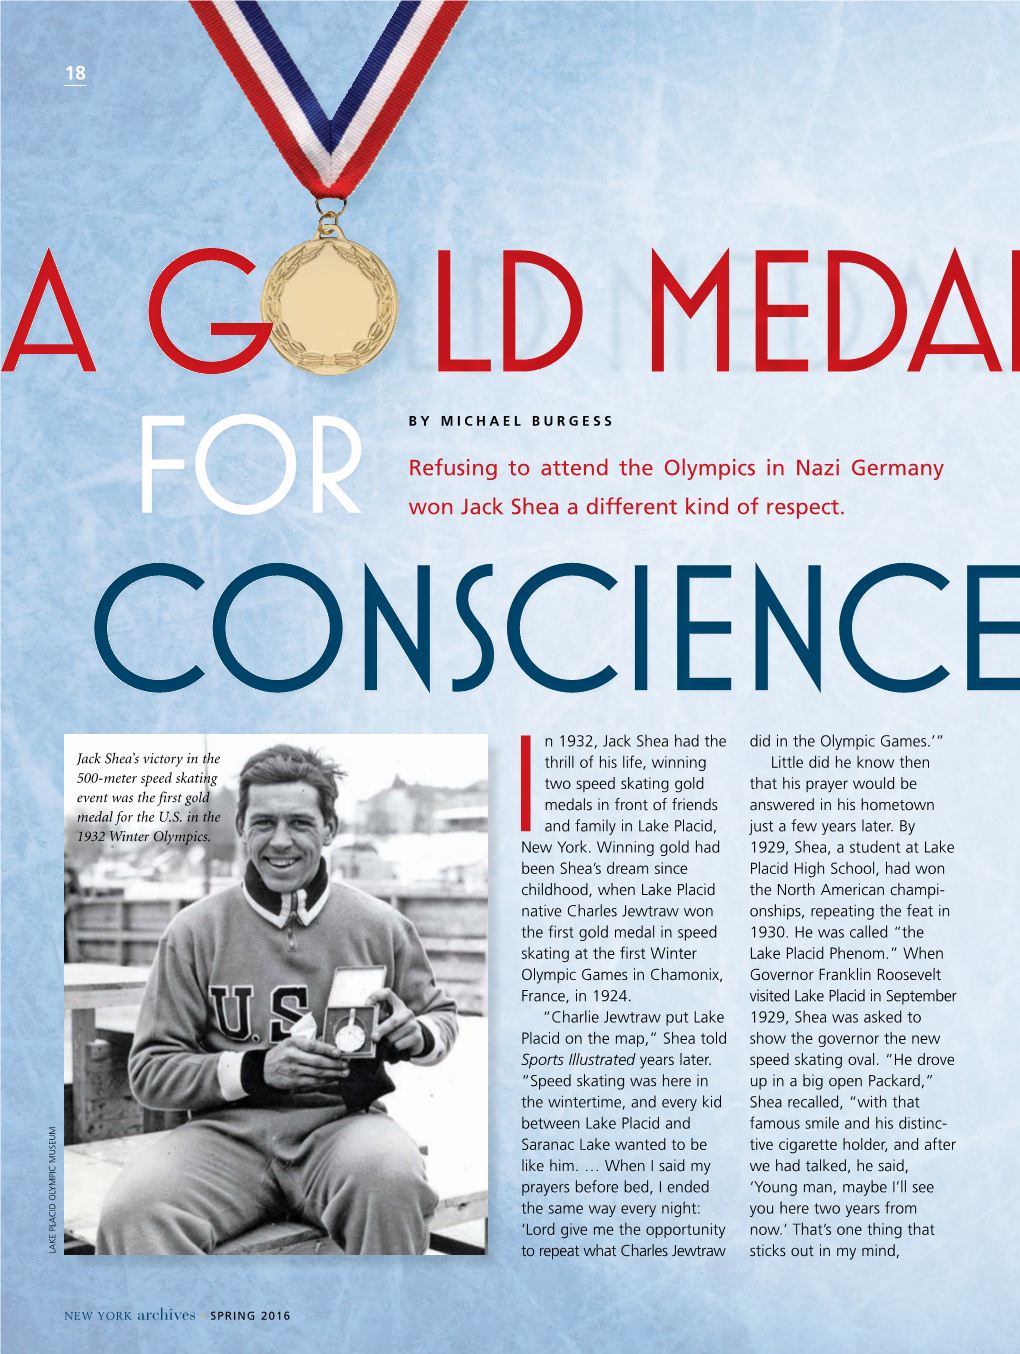 A Gold Medal for Conscience